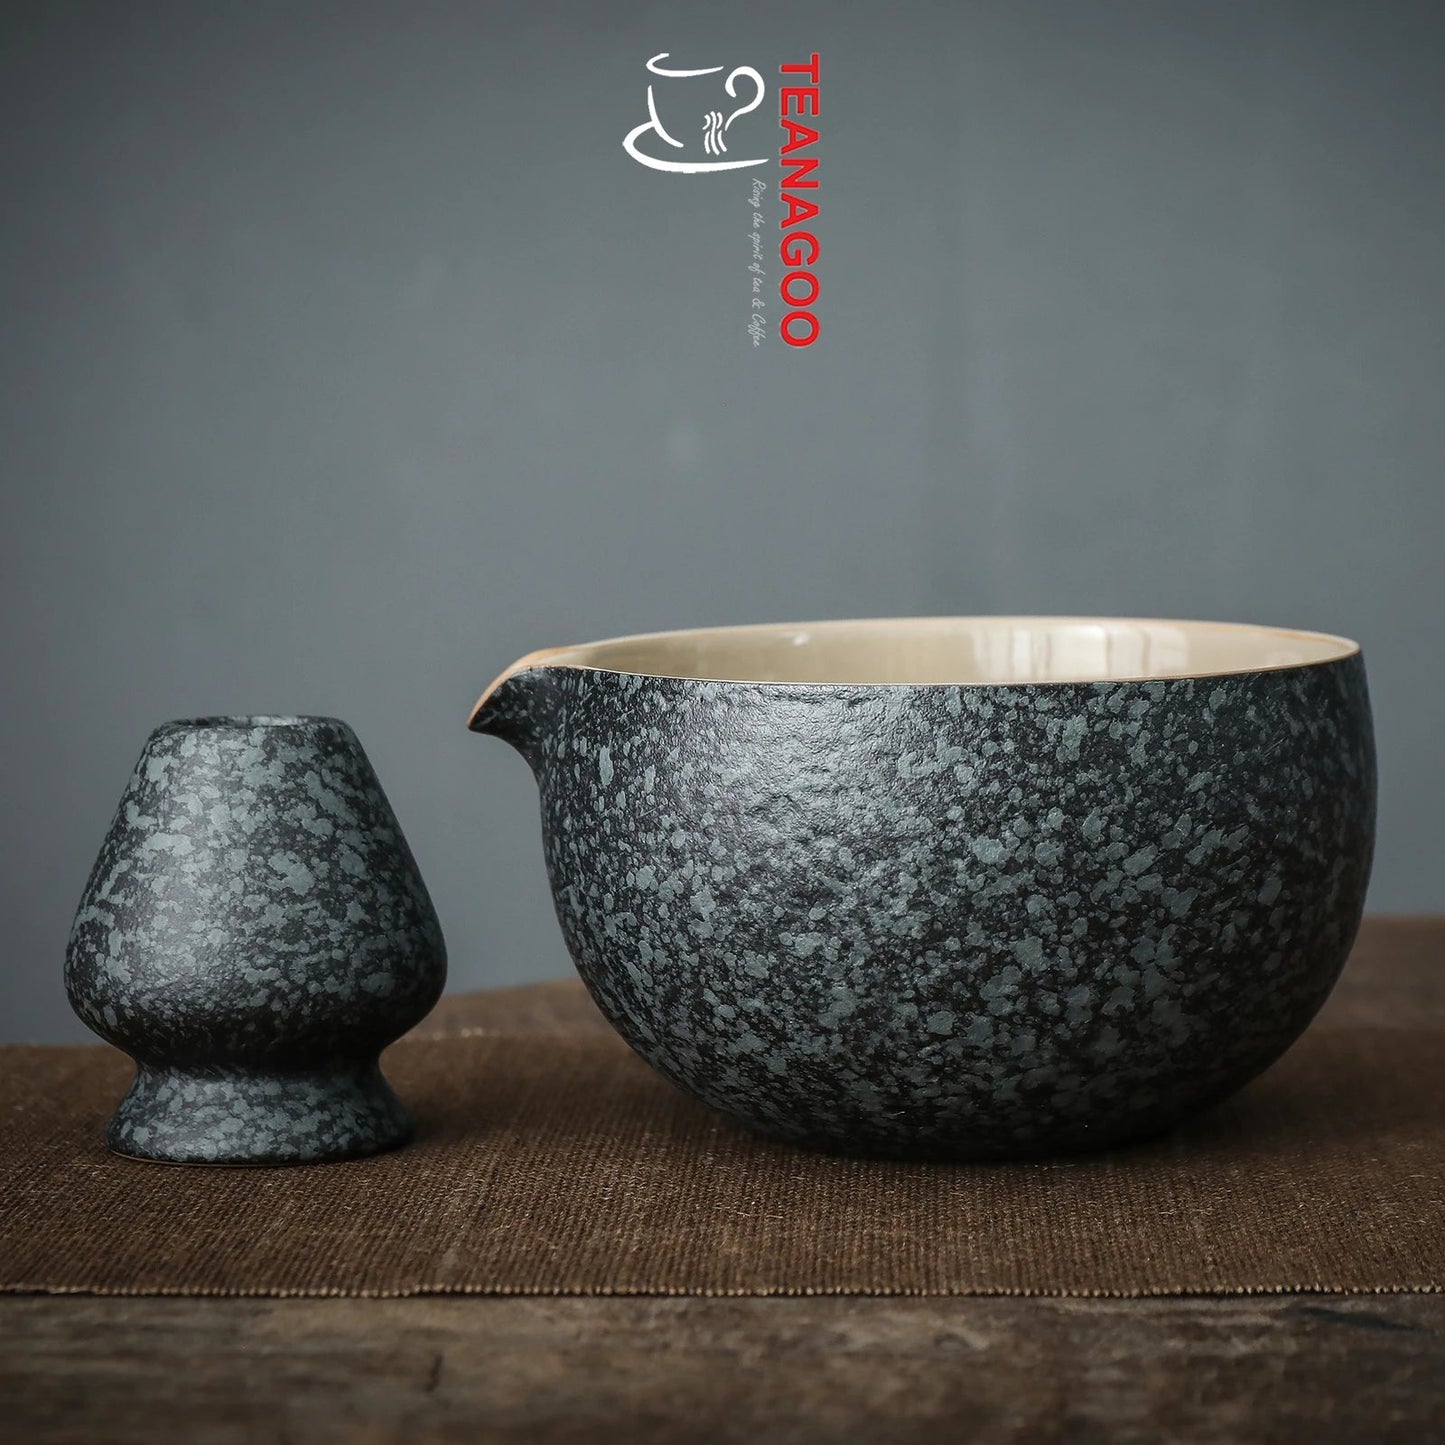 Japanese Natural Rock Texture Ceramic Matcha Chawan Ceramic Bowl with Whisk Rest Holder Matcha Tea Bowl Ceremonial Accessories